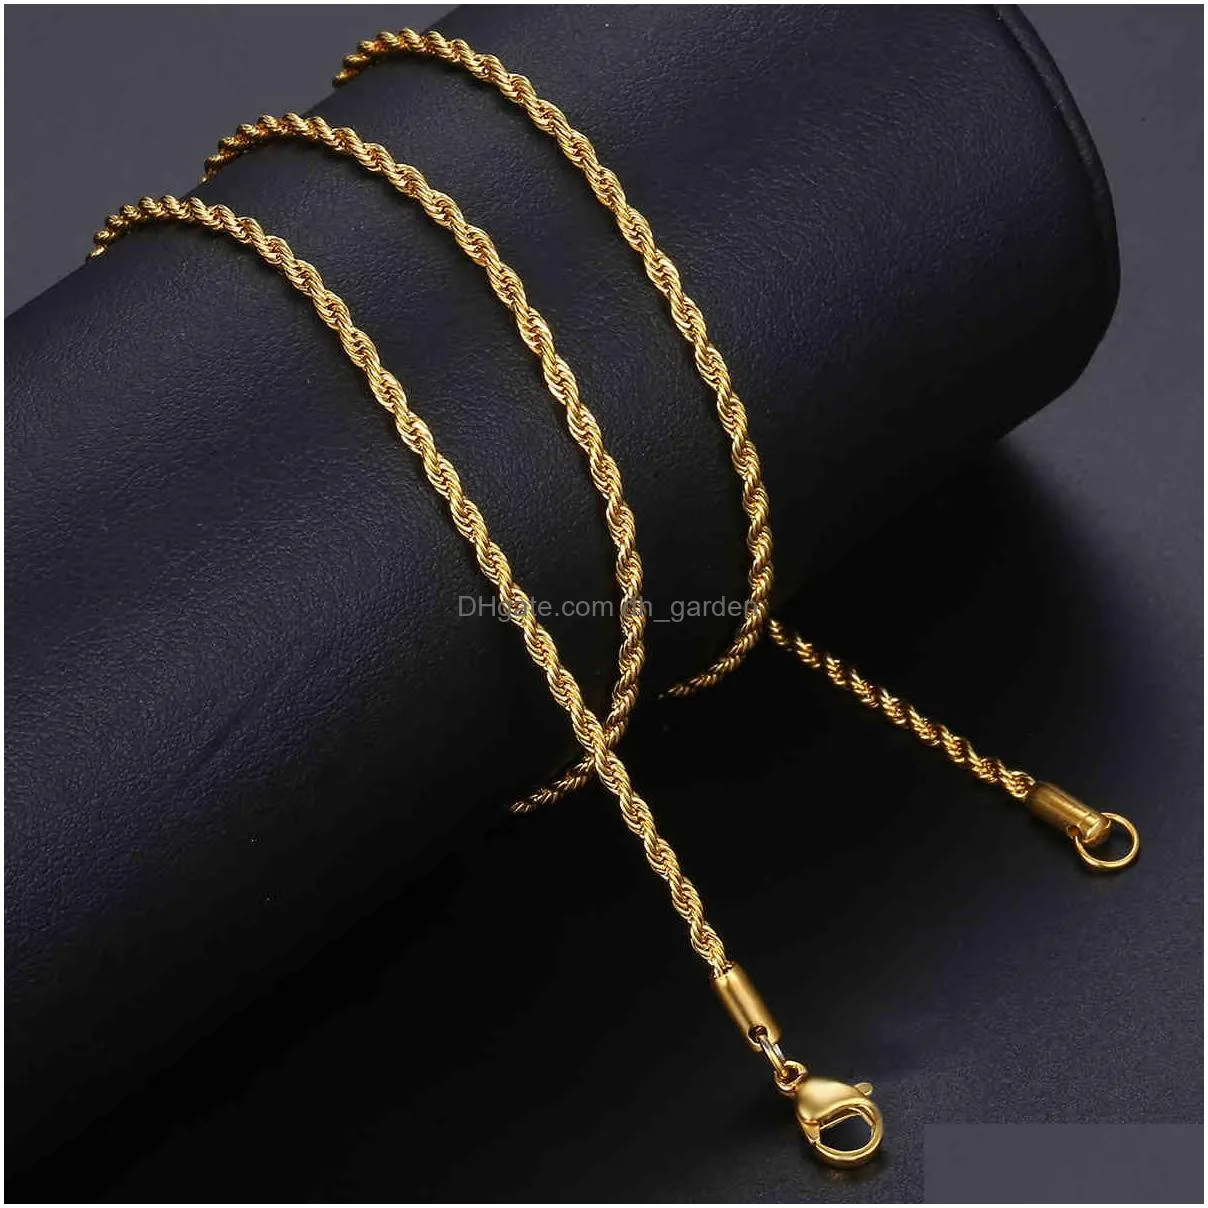 Gold Chain For Men Women Wheat Figaro Rope Cuban Link Filled Stainless Steel Necklaces Male Jewelry Gift Wholesale Dhgarden Ot9Bj